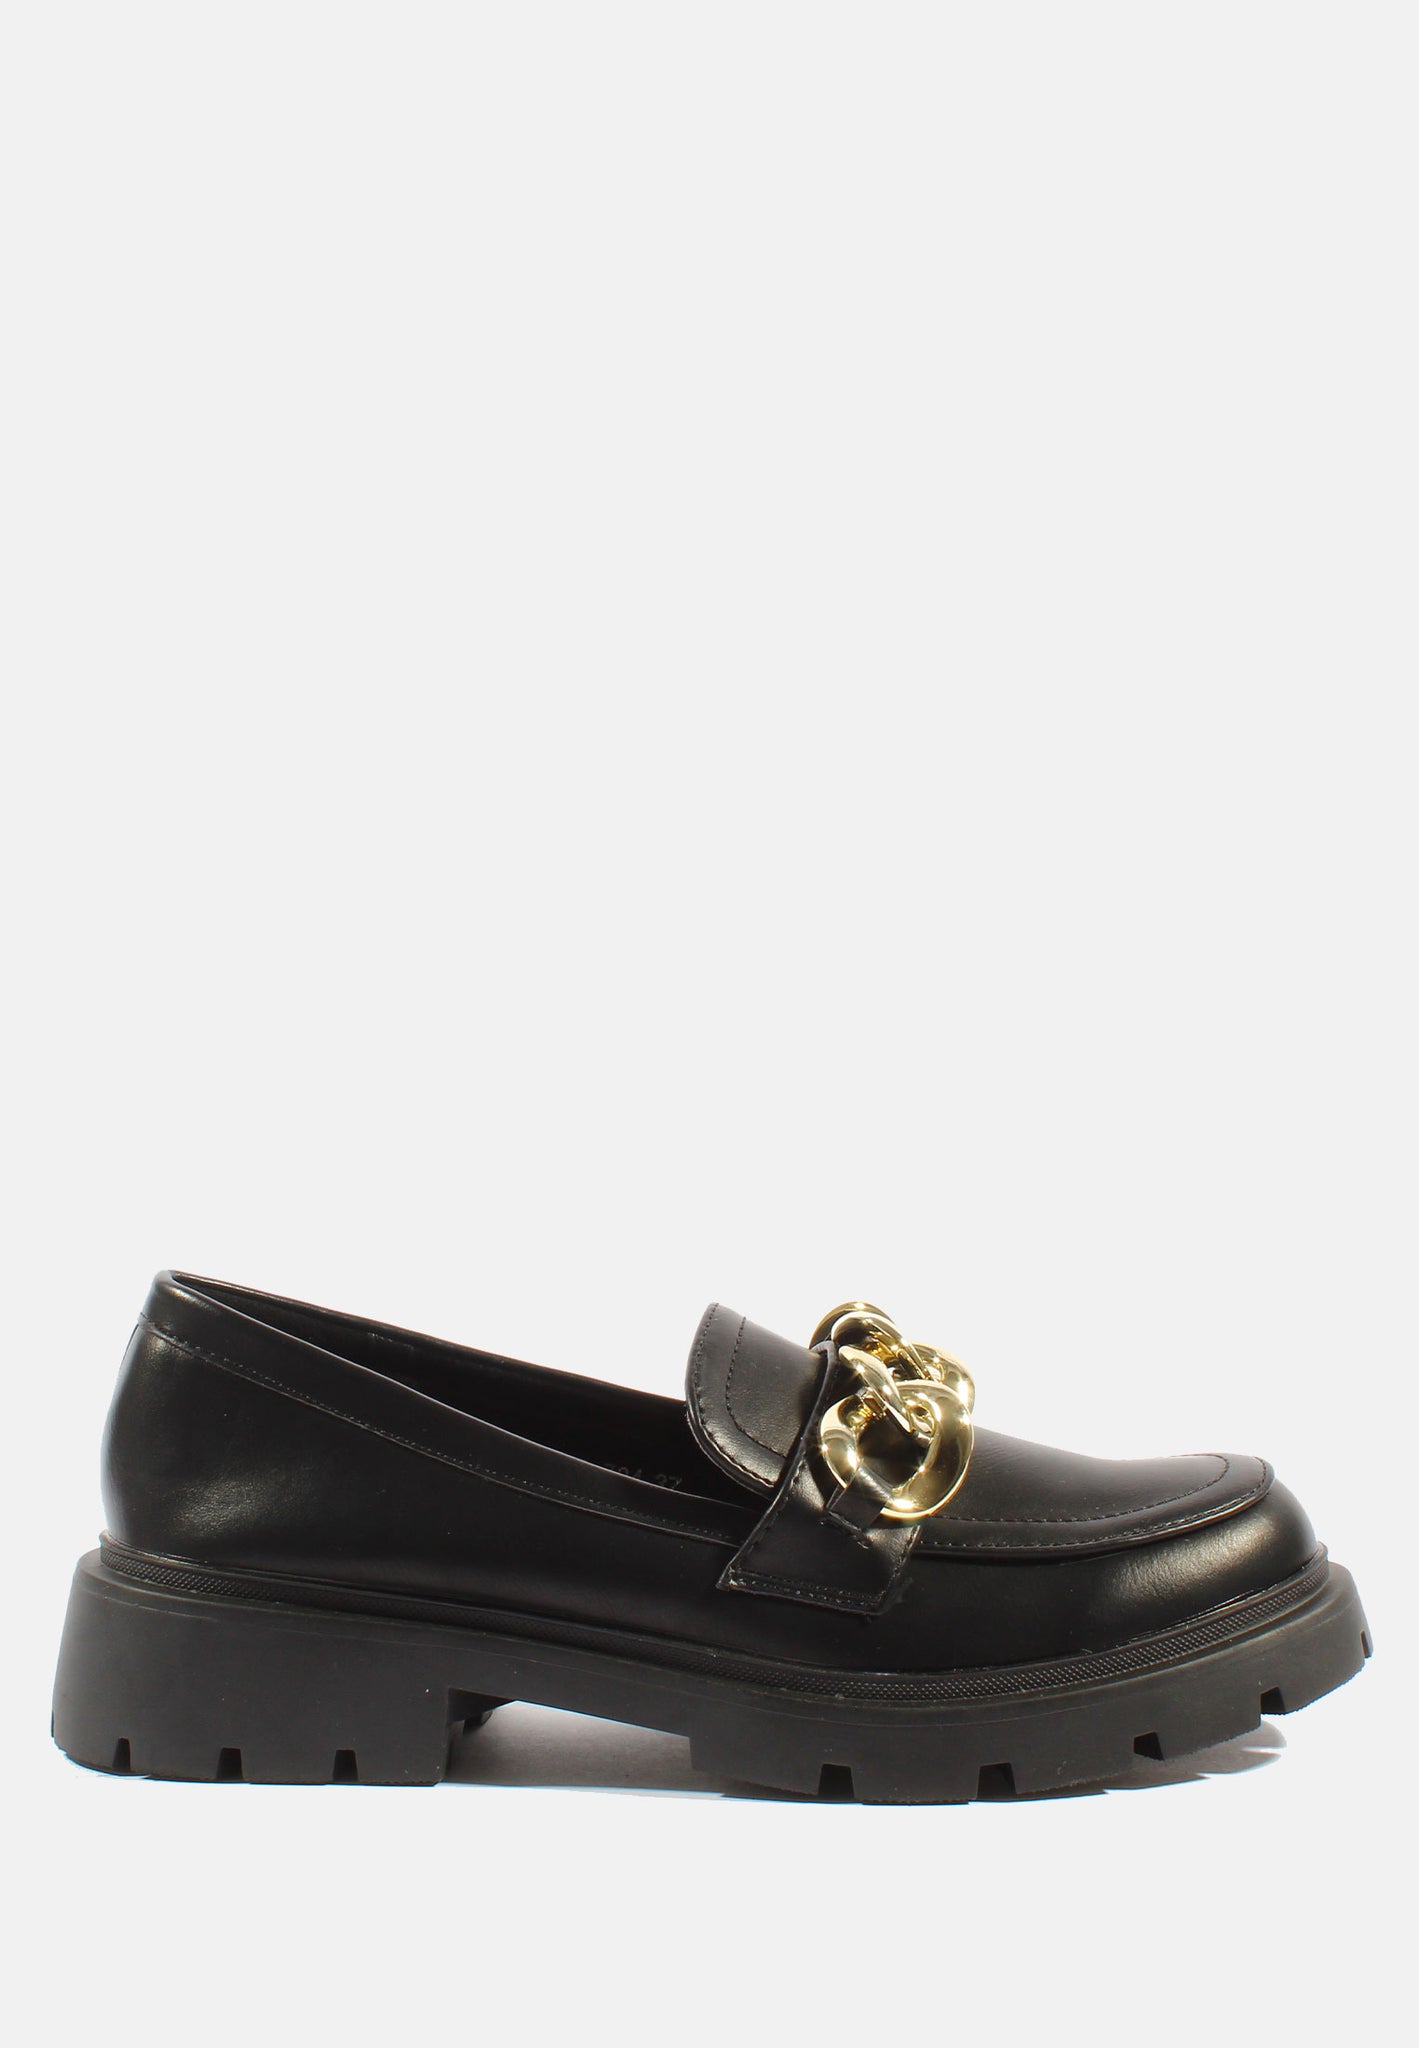 Black moccasin with golden chain